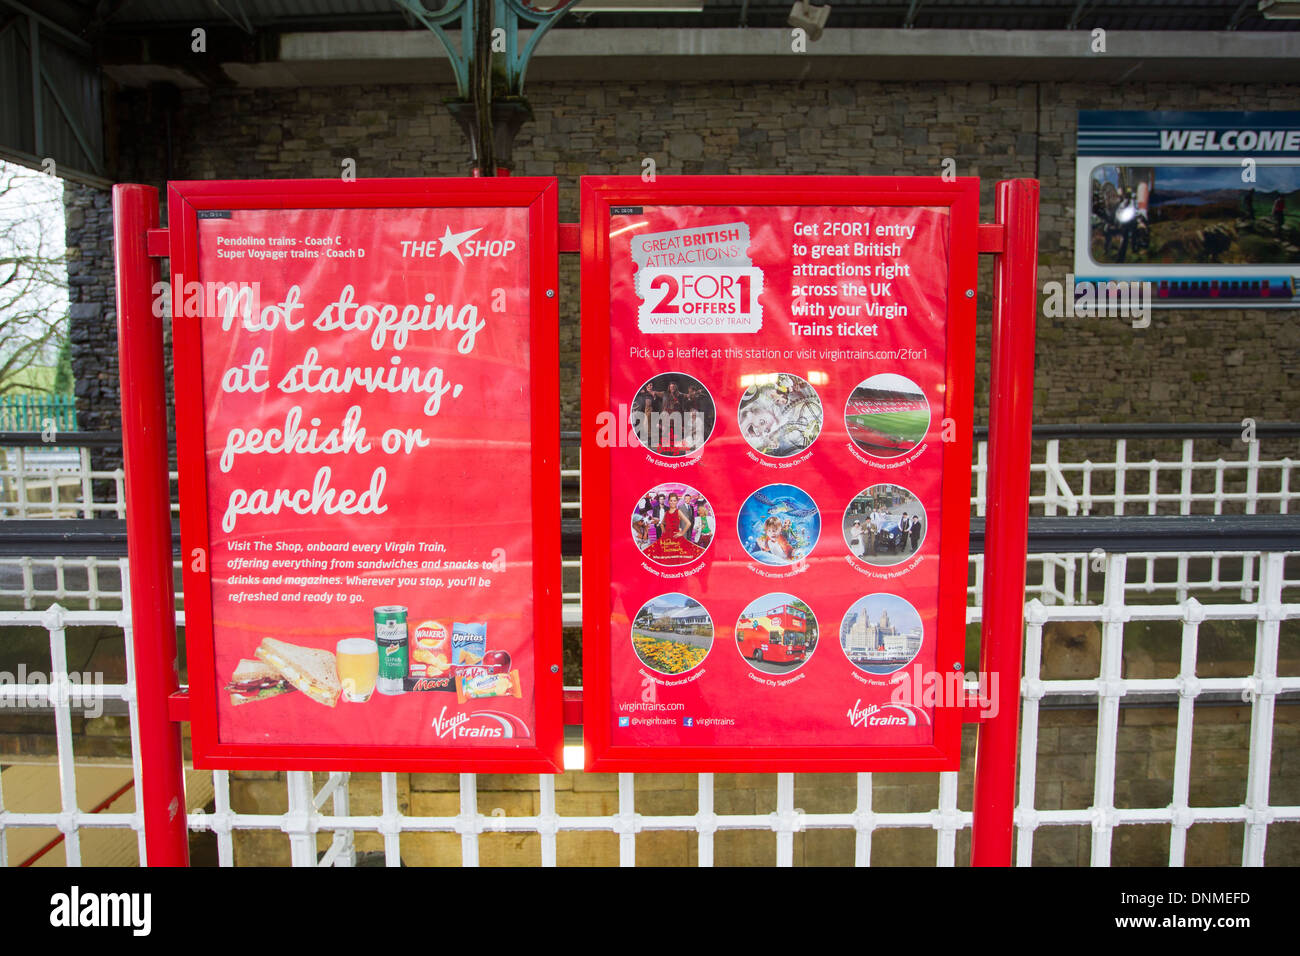 Virgin Trains snack & drink poster also 2 for 1 offers on attractions Stock Photo